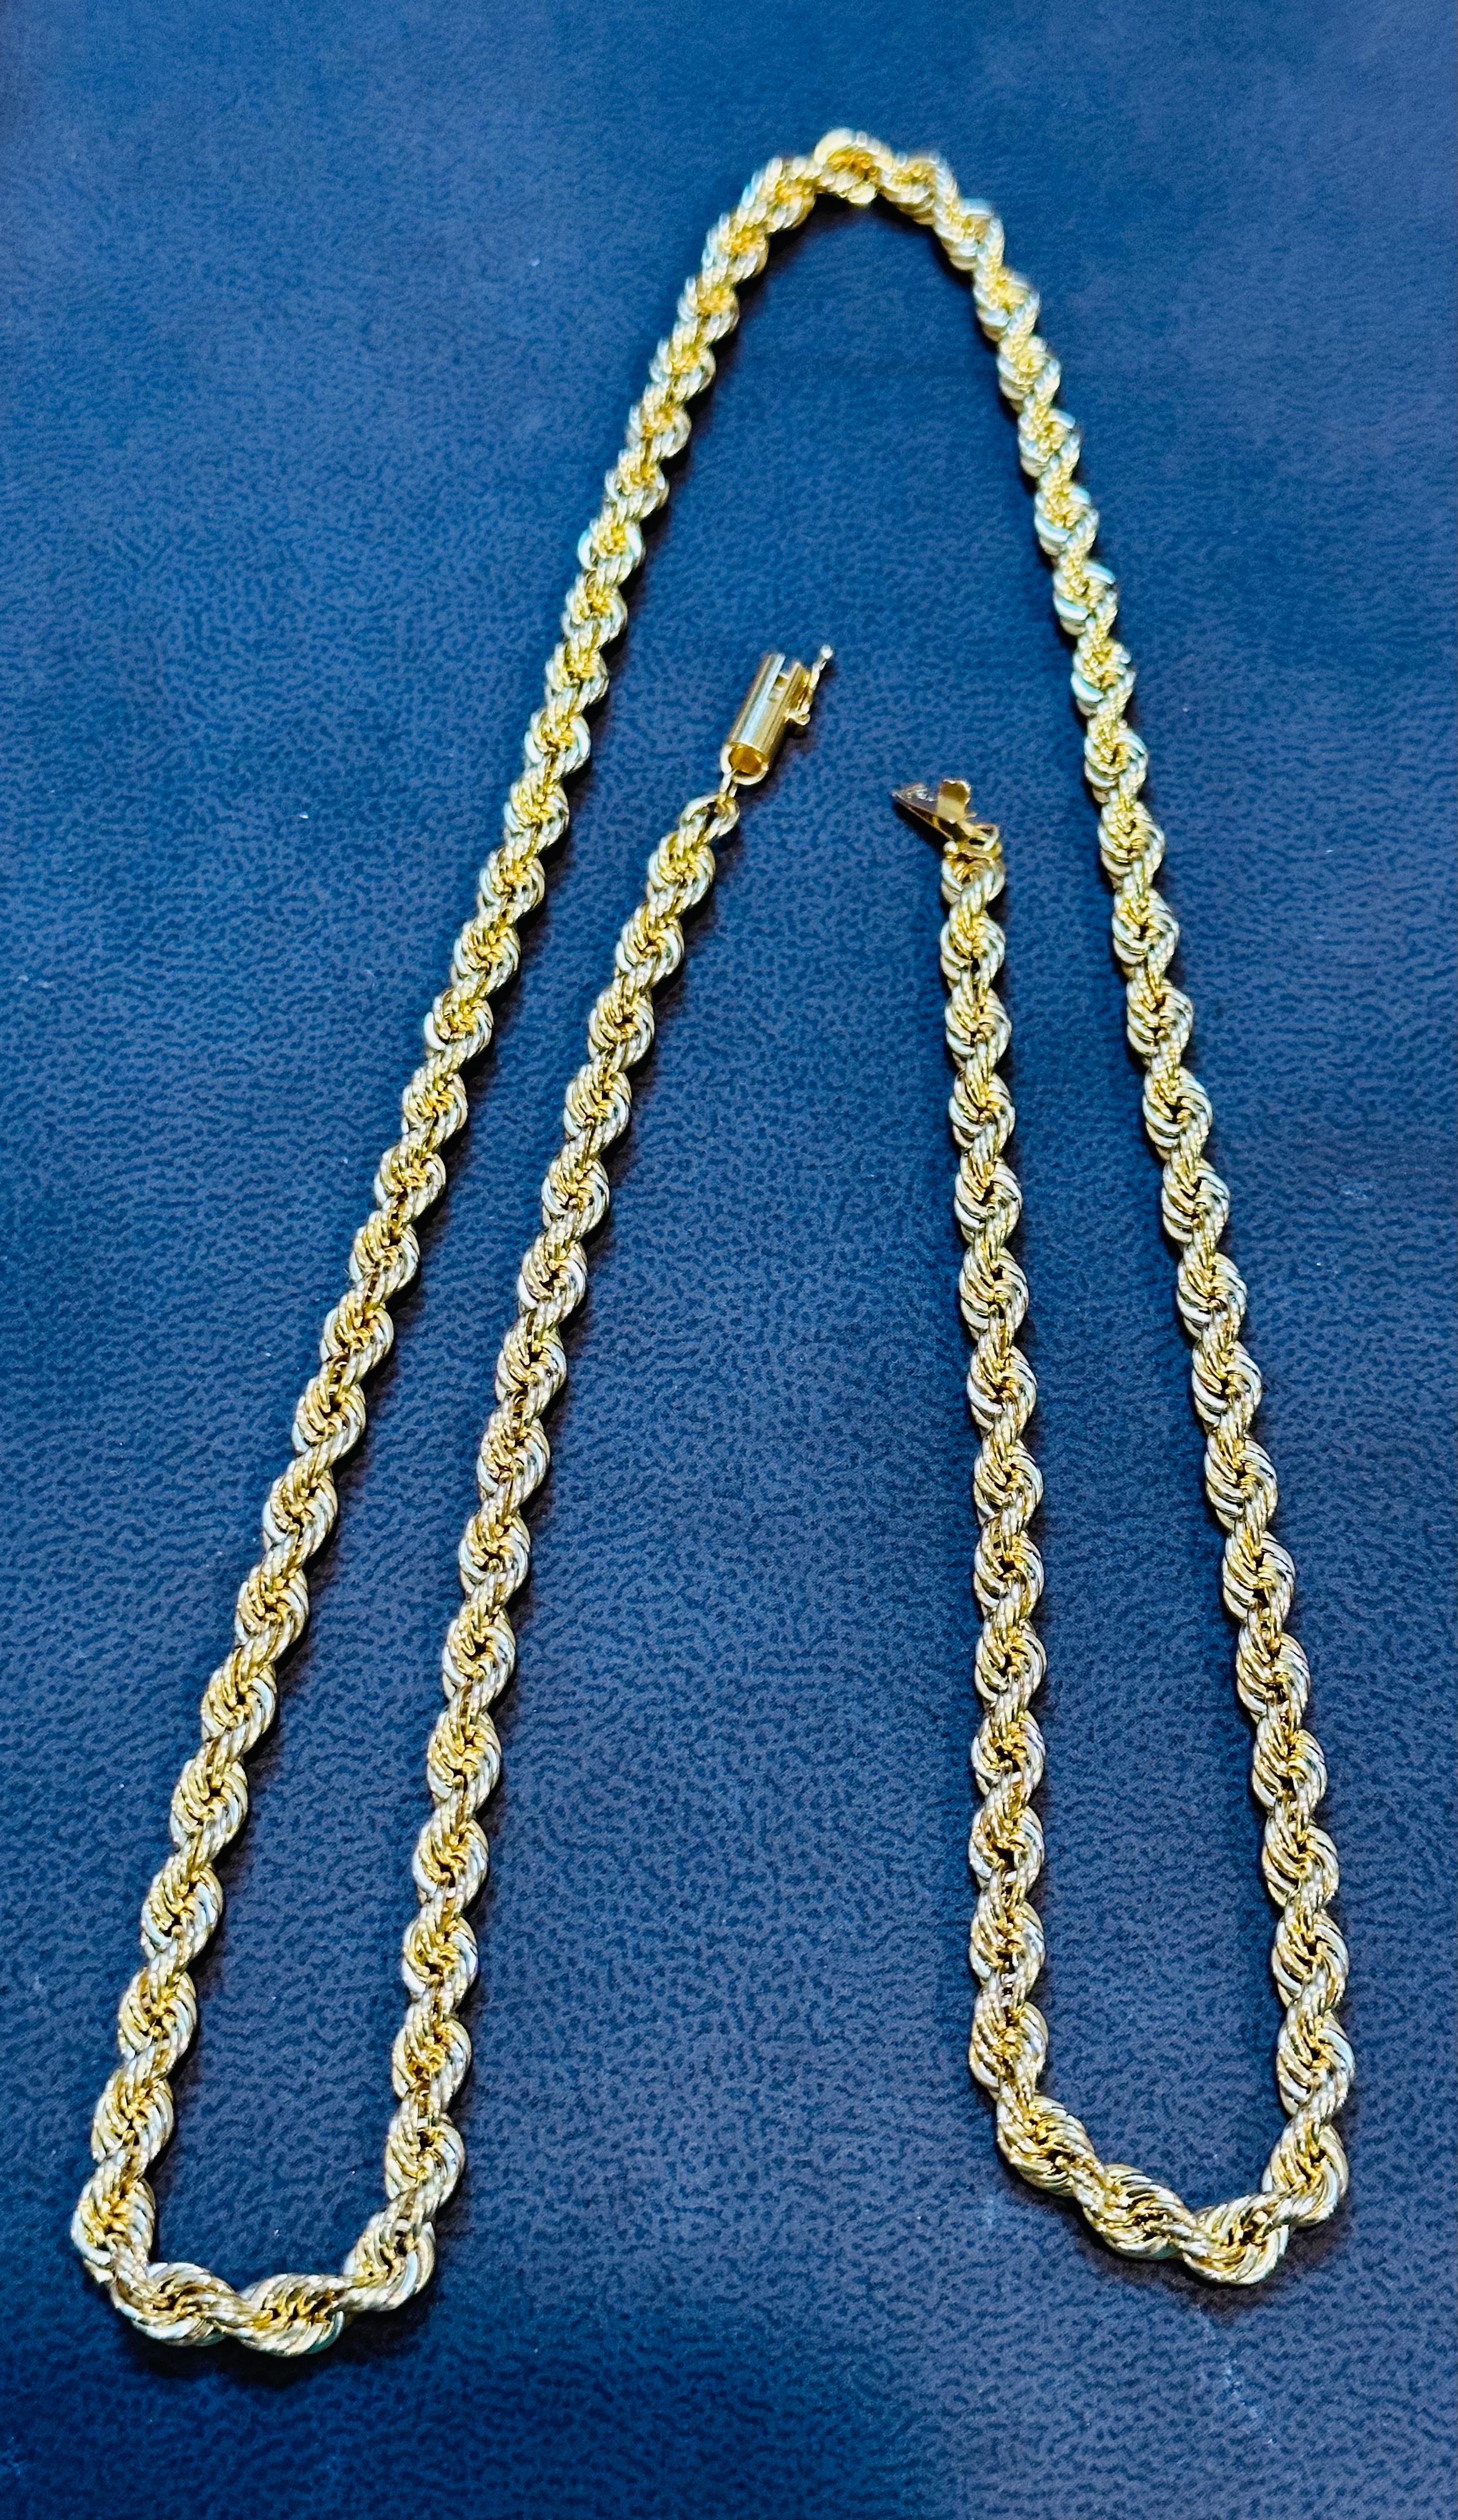 Vintage 14 Karat Yellow Gold 17 Gm, Rope Chain Necklace 4